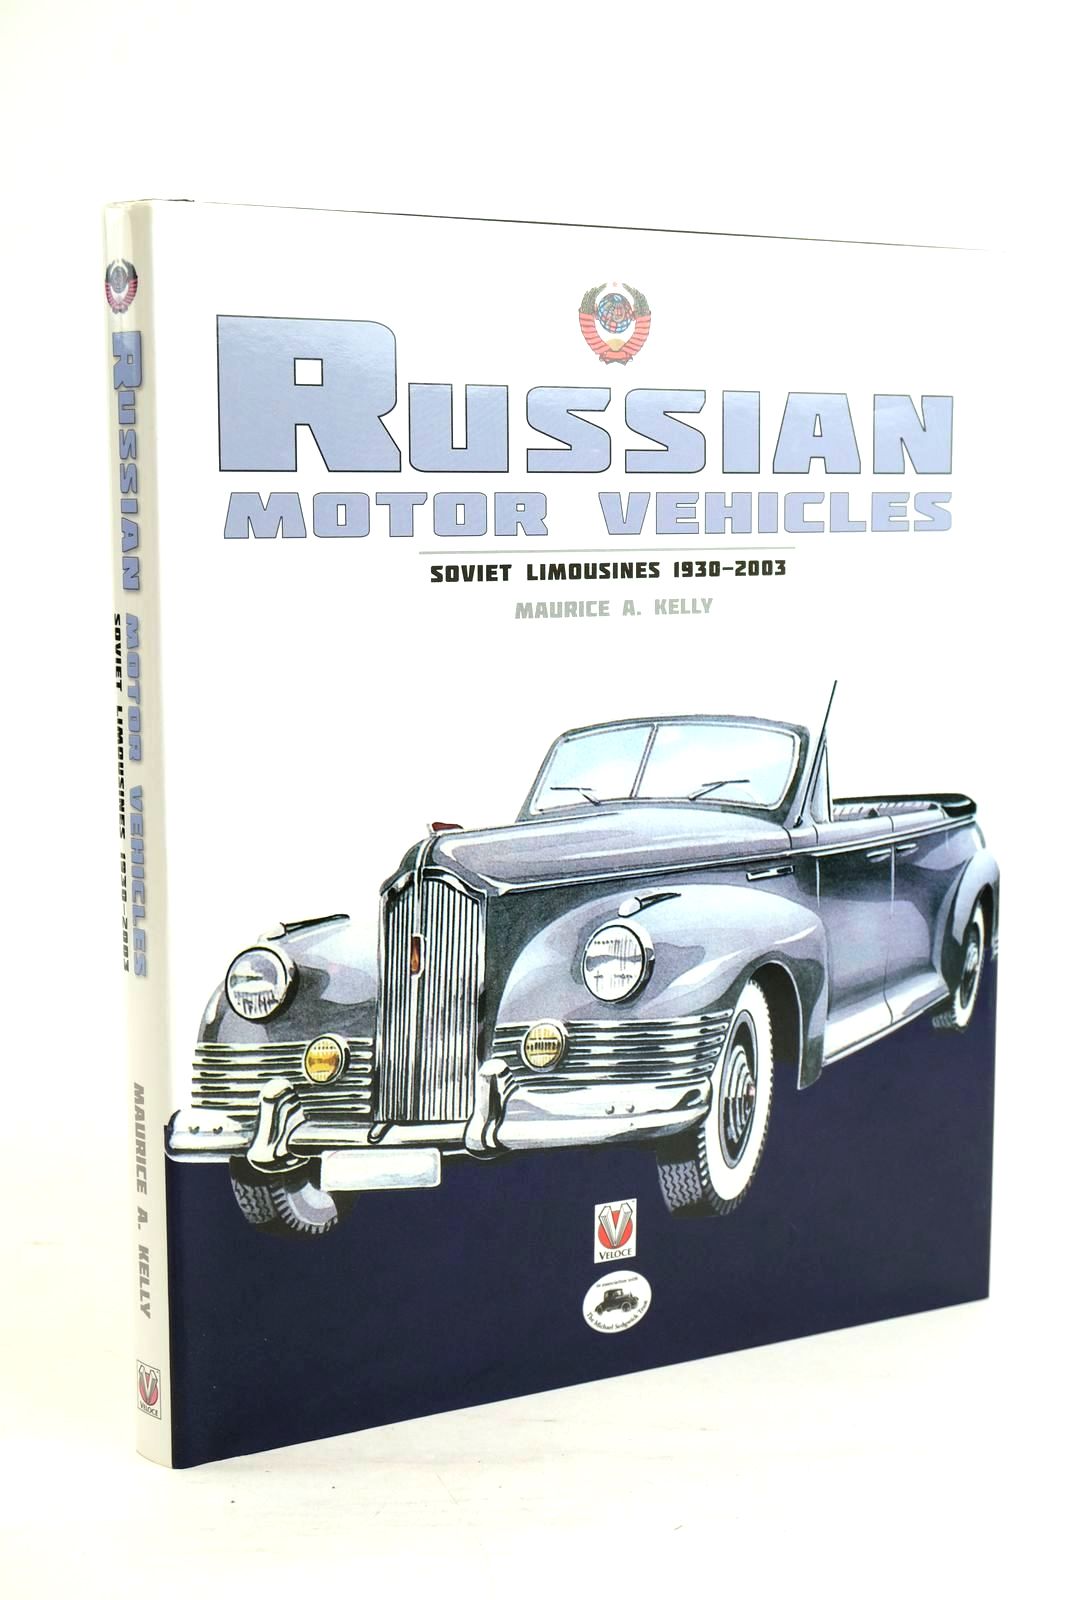 Photo of RUSSIAN MOTOR VEHICLES - SOVIET LIMOUSINES 1930-2003 written by Kelly, Maurice A. published by Veloce Publishing (STOCK CODE: 1320159)  for sale by Stella & Rose's Books